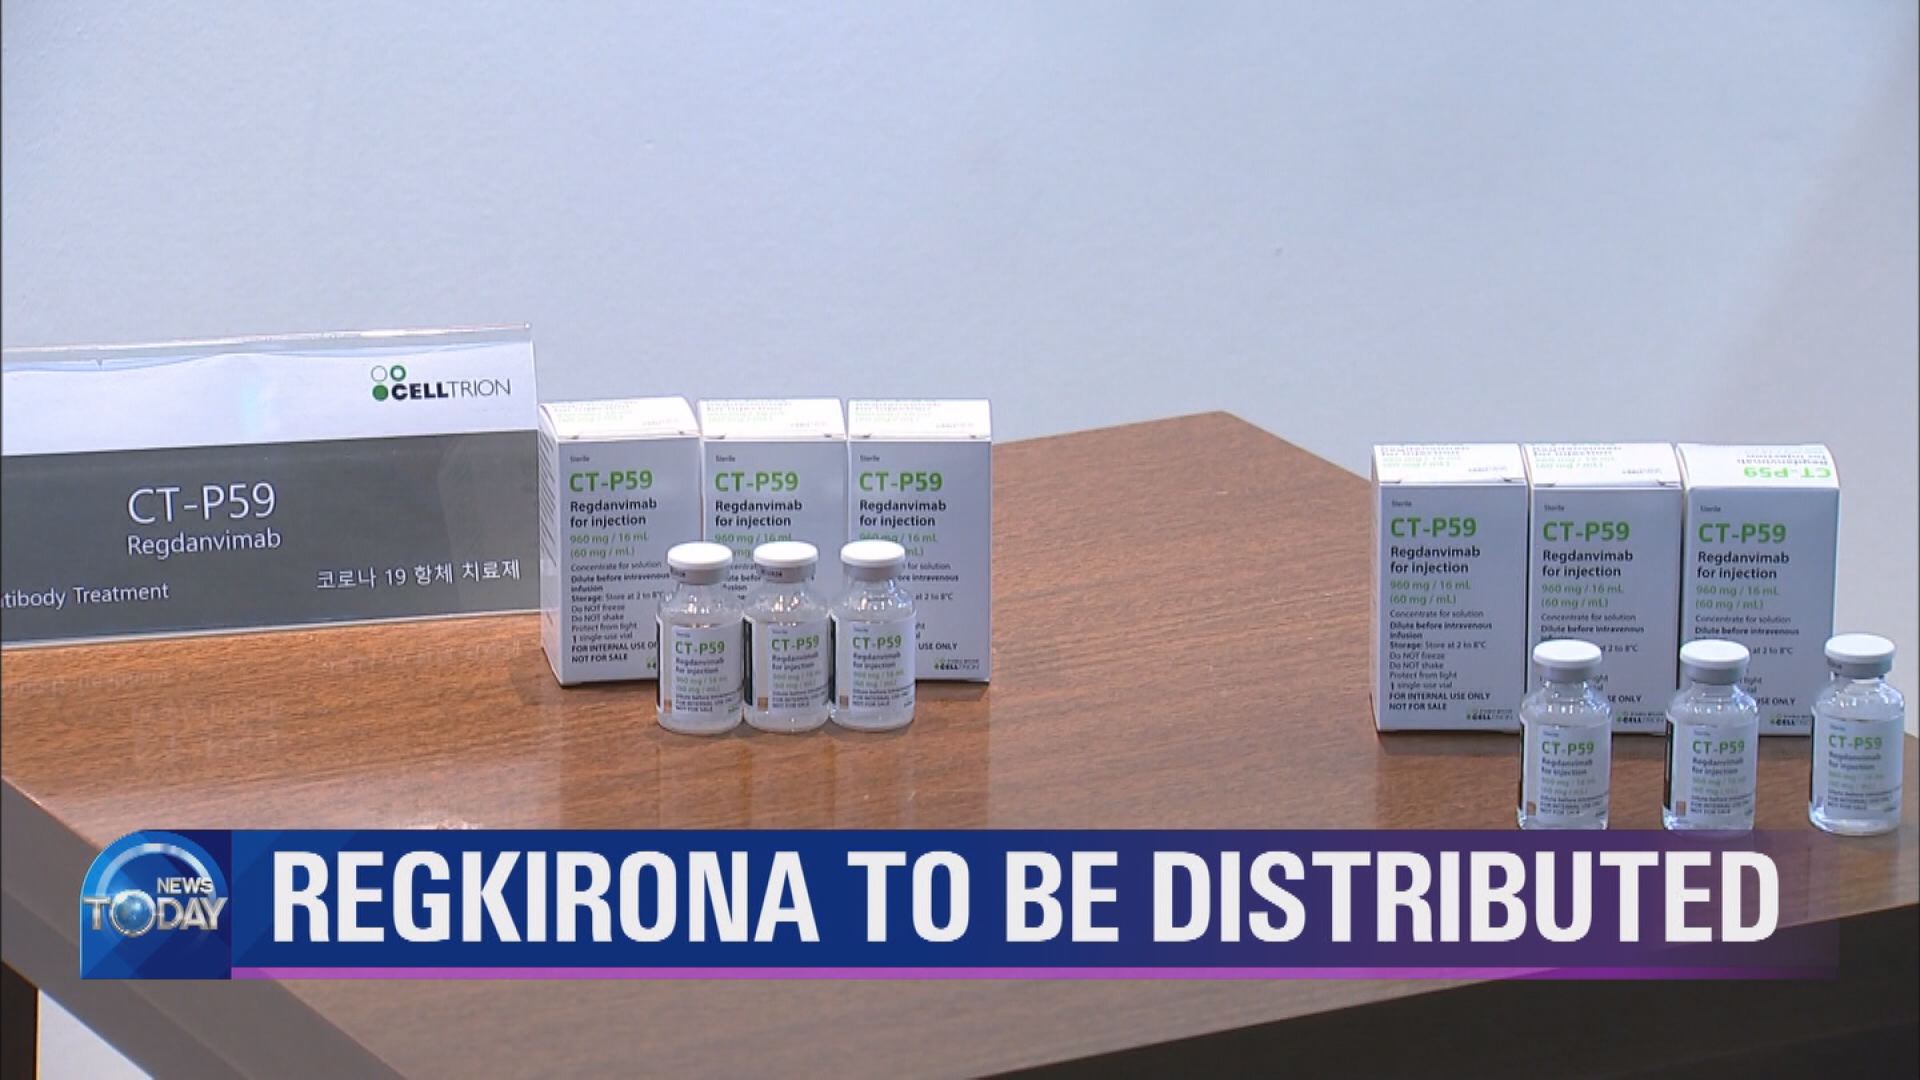 REGKIRONA TO BE DISTRIBUTED